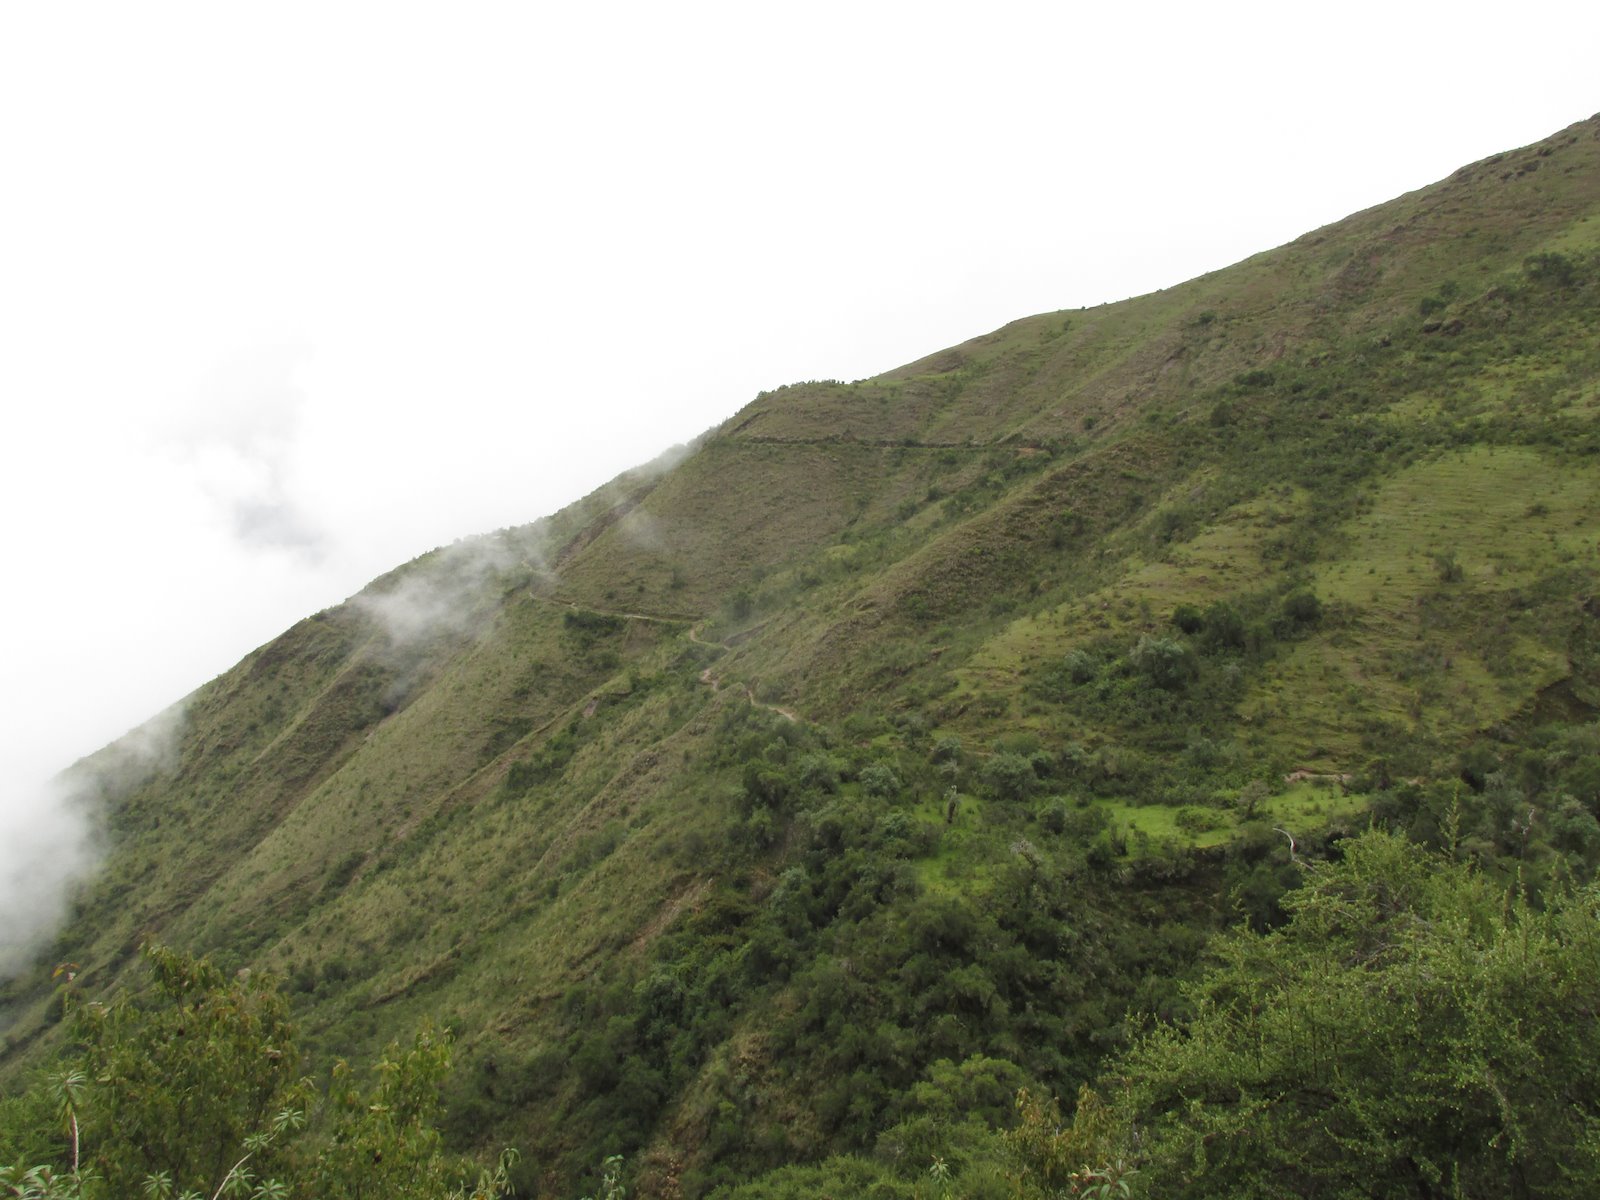 The trail is visible, cut into the steep terrain